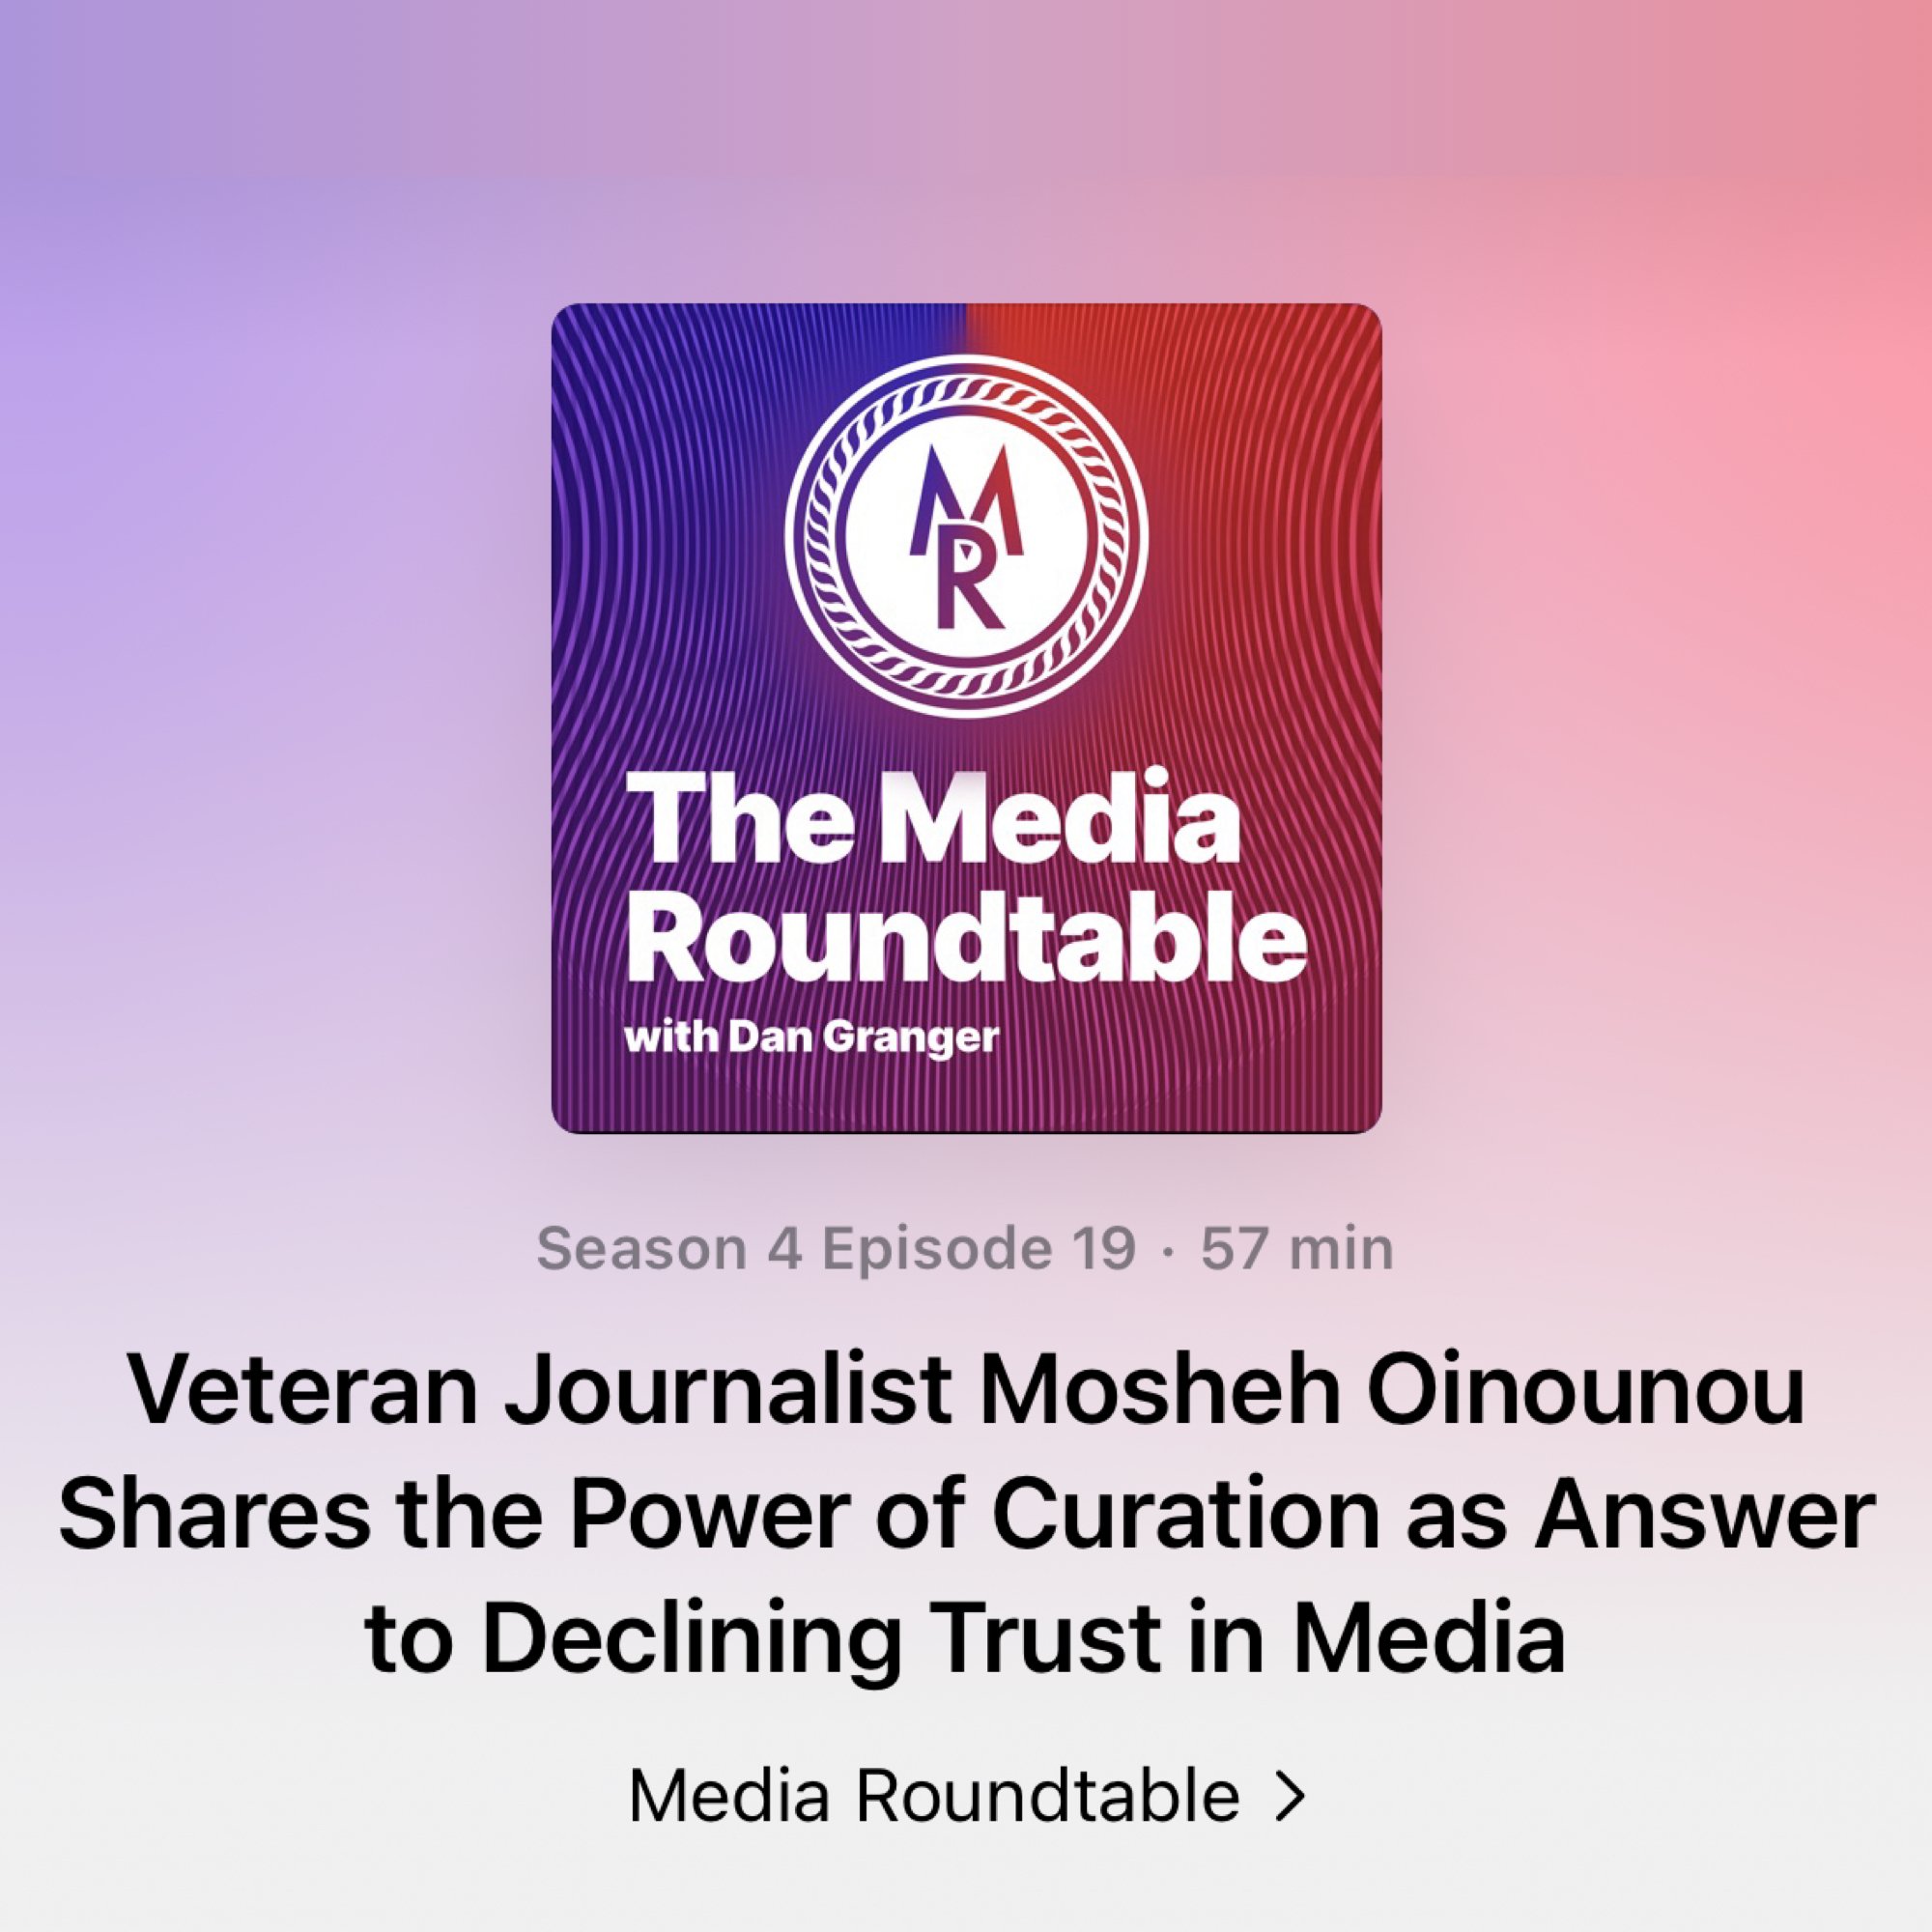 The Media Roundtable Podcast: Veteran Journalist Mosheh Oinounou shares the power of curation as answer to declining trust in media 